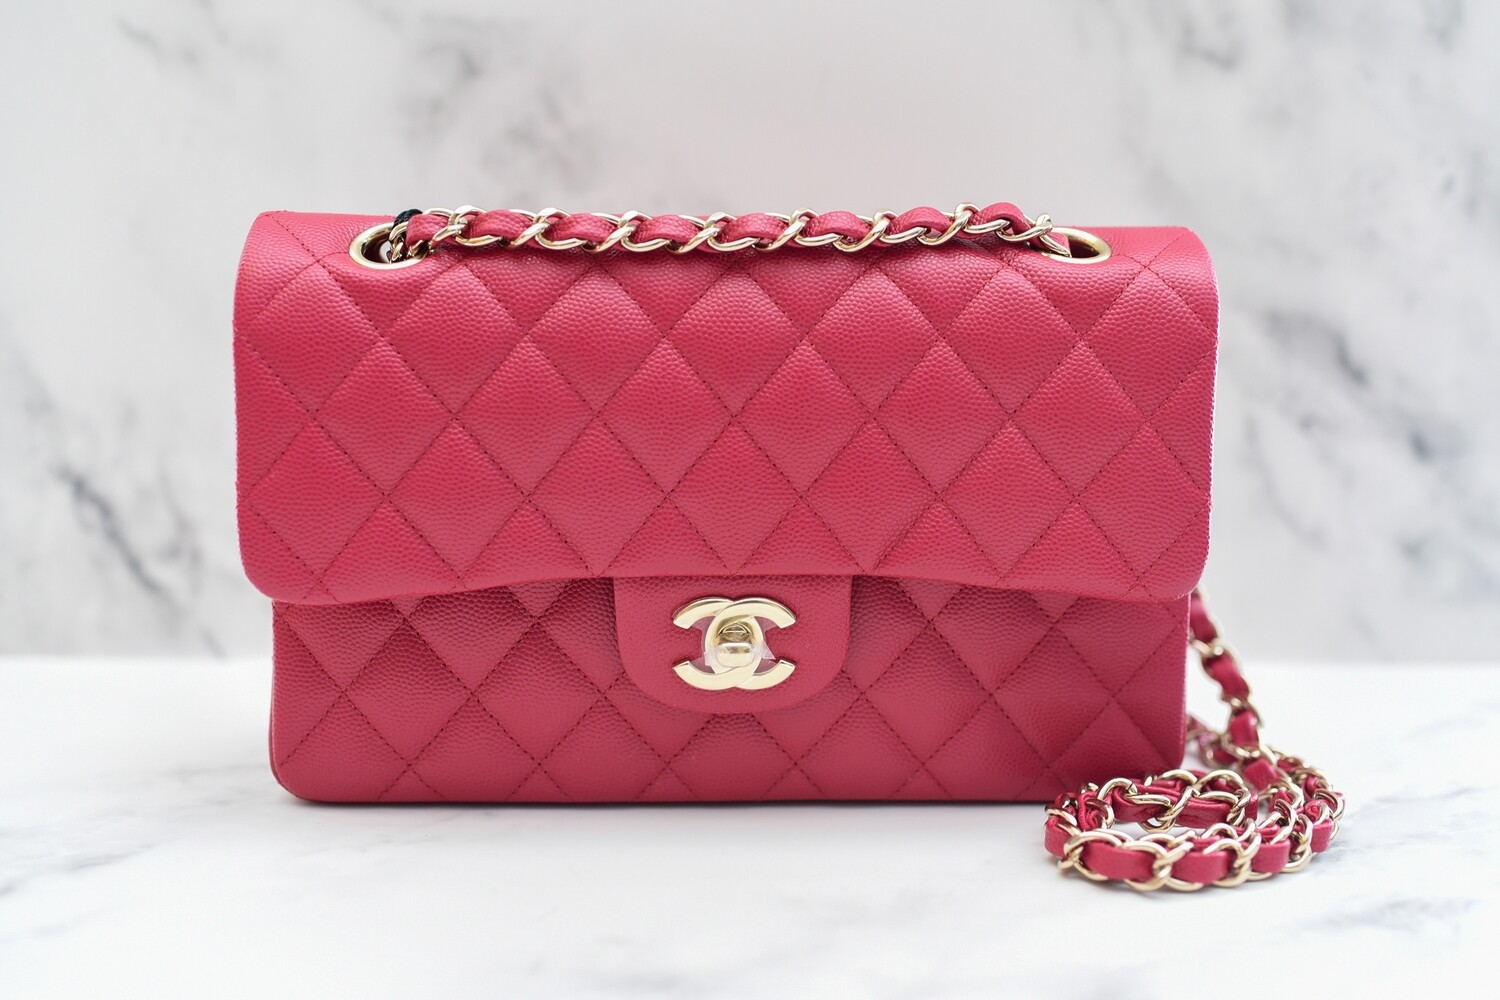 Opulent Habits on Instagram: “THIS PINK! 💞😍💓WOW! Authentic Chanel Pink  19c Caviar Medium Flap with sh…